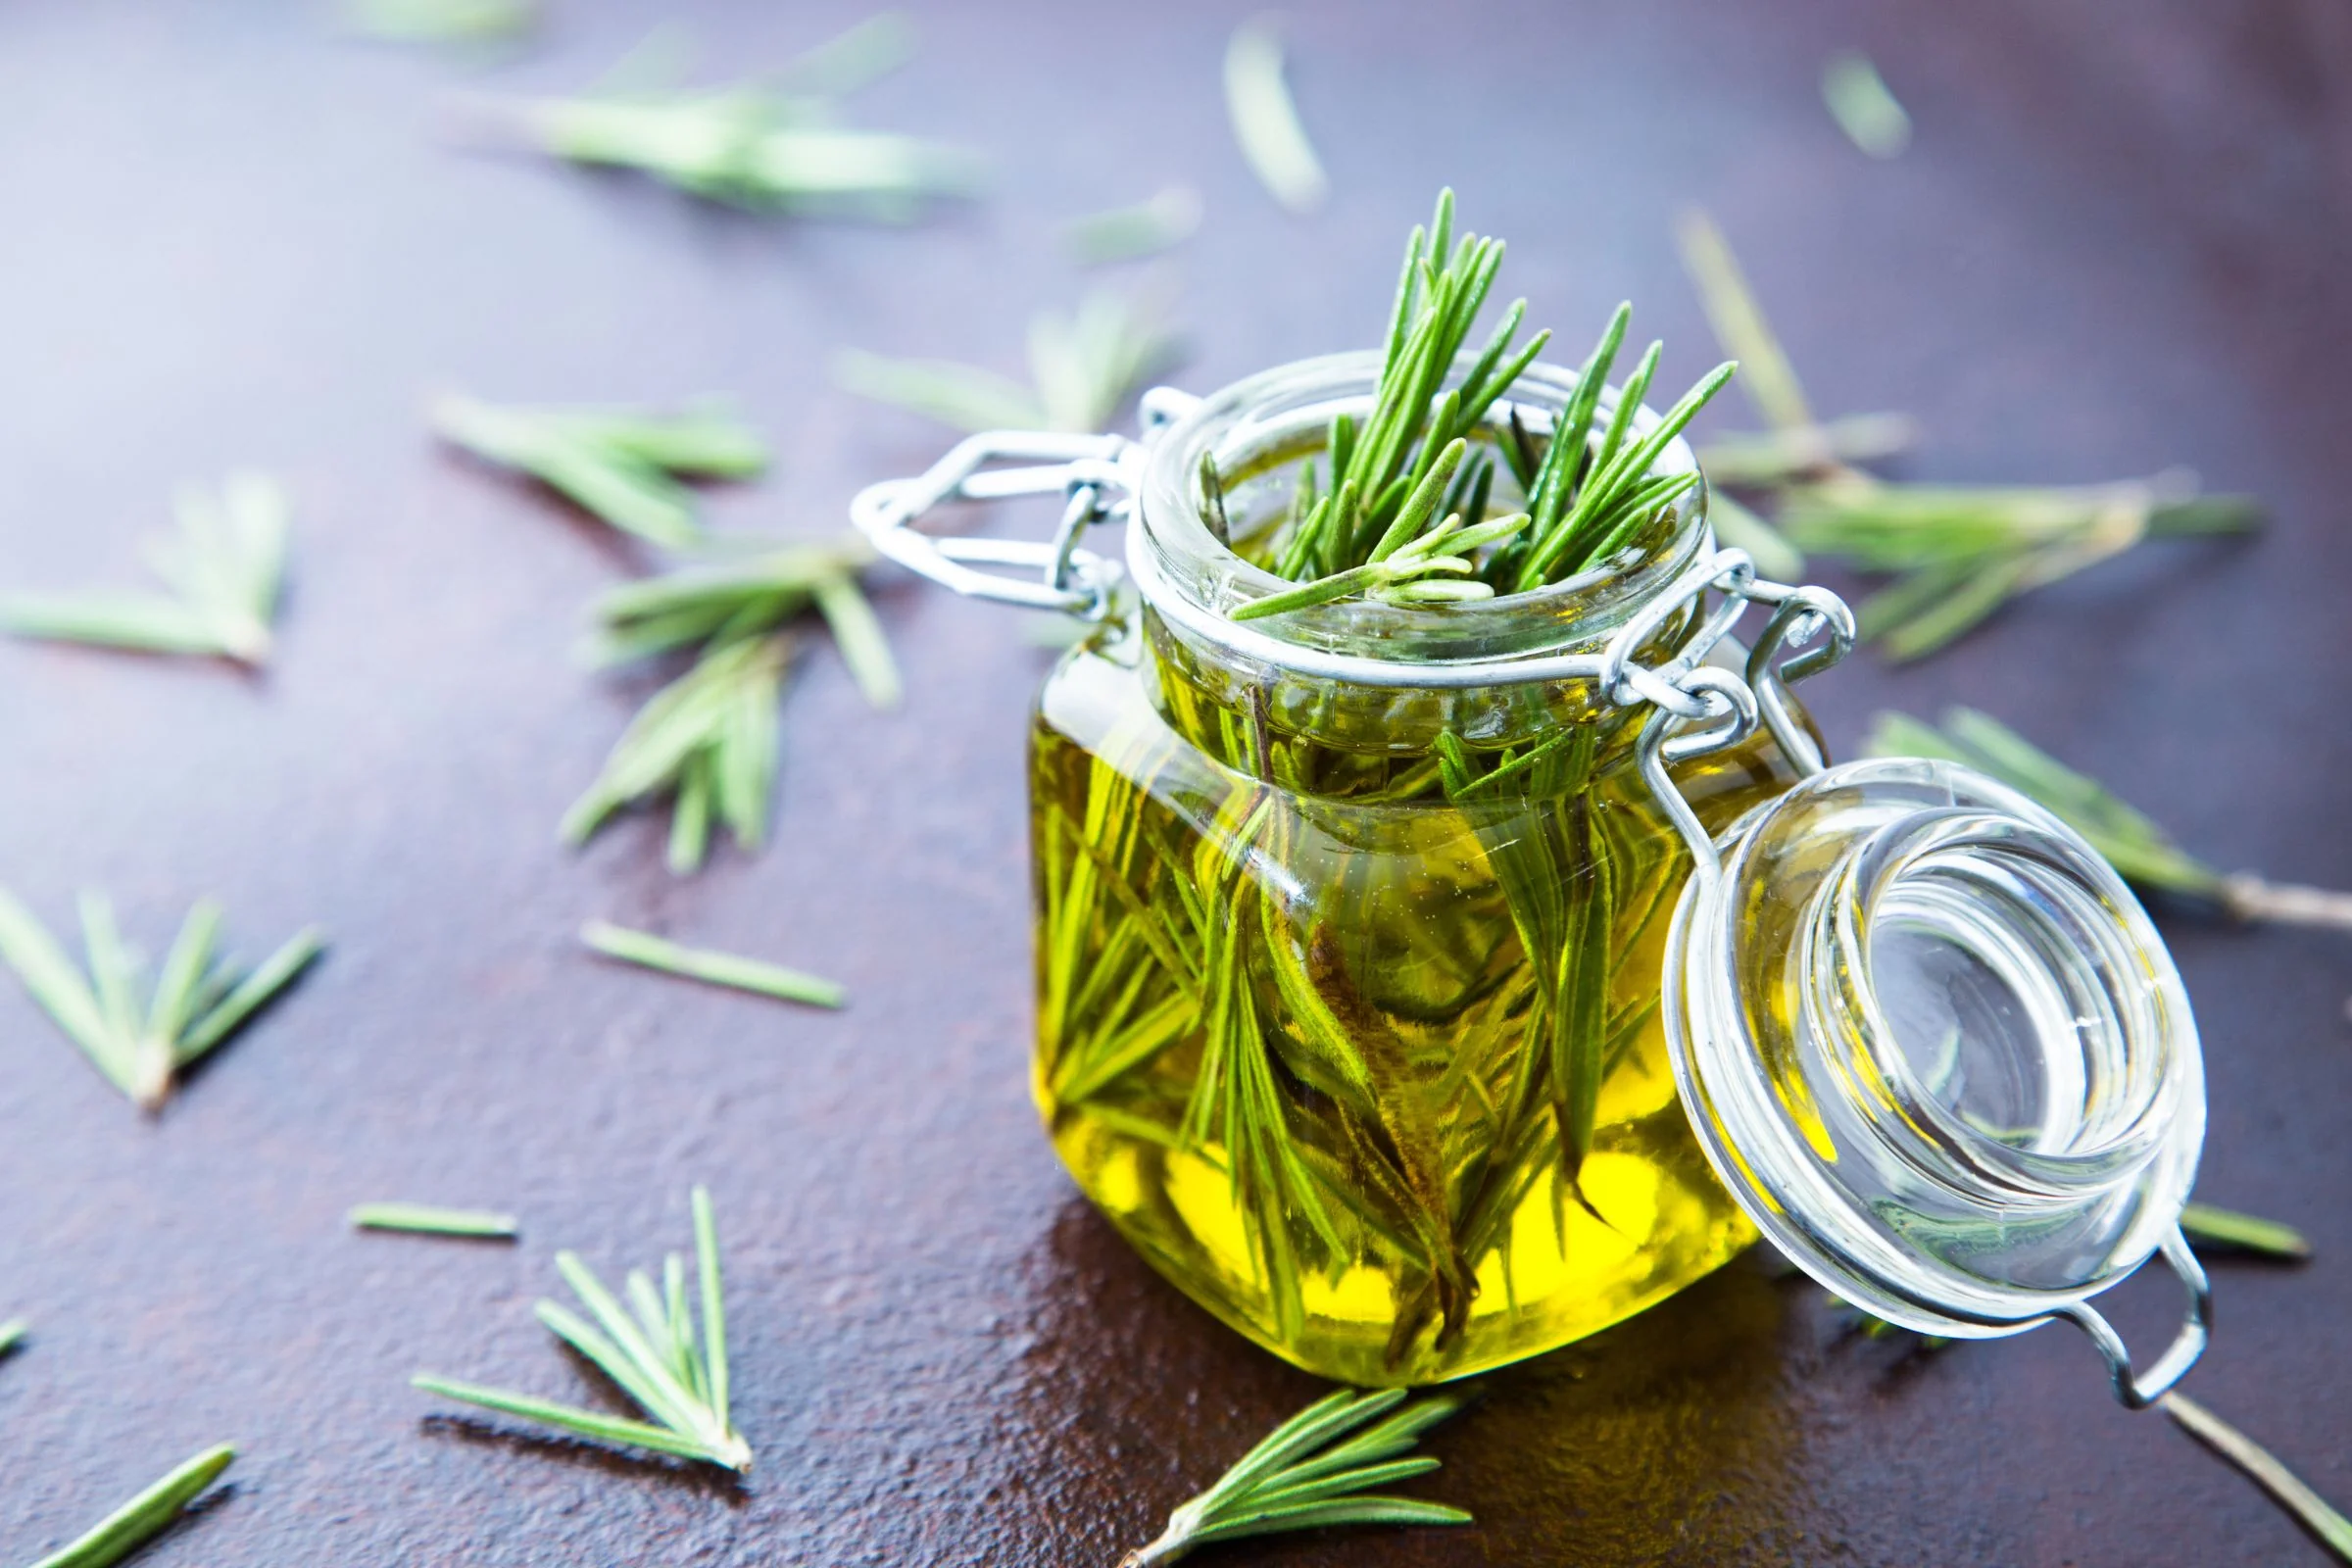 Rosemary oil is often suggested to be beneficial for hair loss due to its potential to promote hair growth and improve overall hair health.